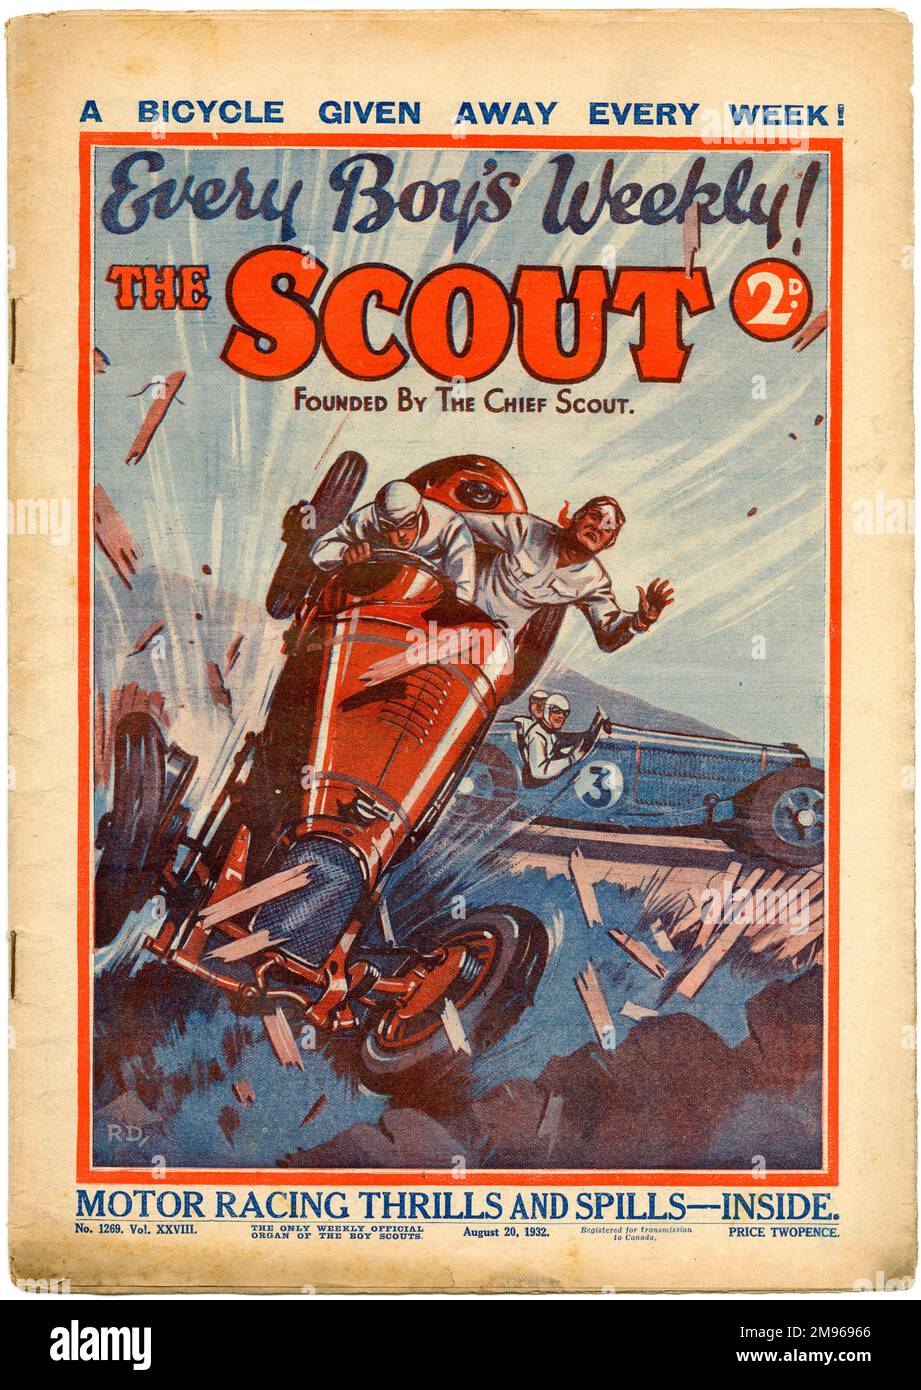 Front cover of The Scout magazine showing a rather calamitous motor racing crash, with more 'motor racing thrills and spills' promised inside. Stock Photo